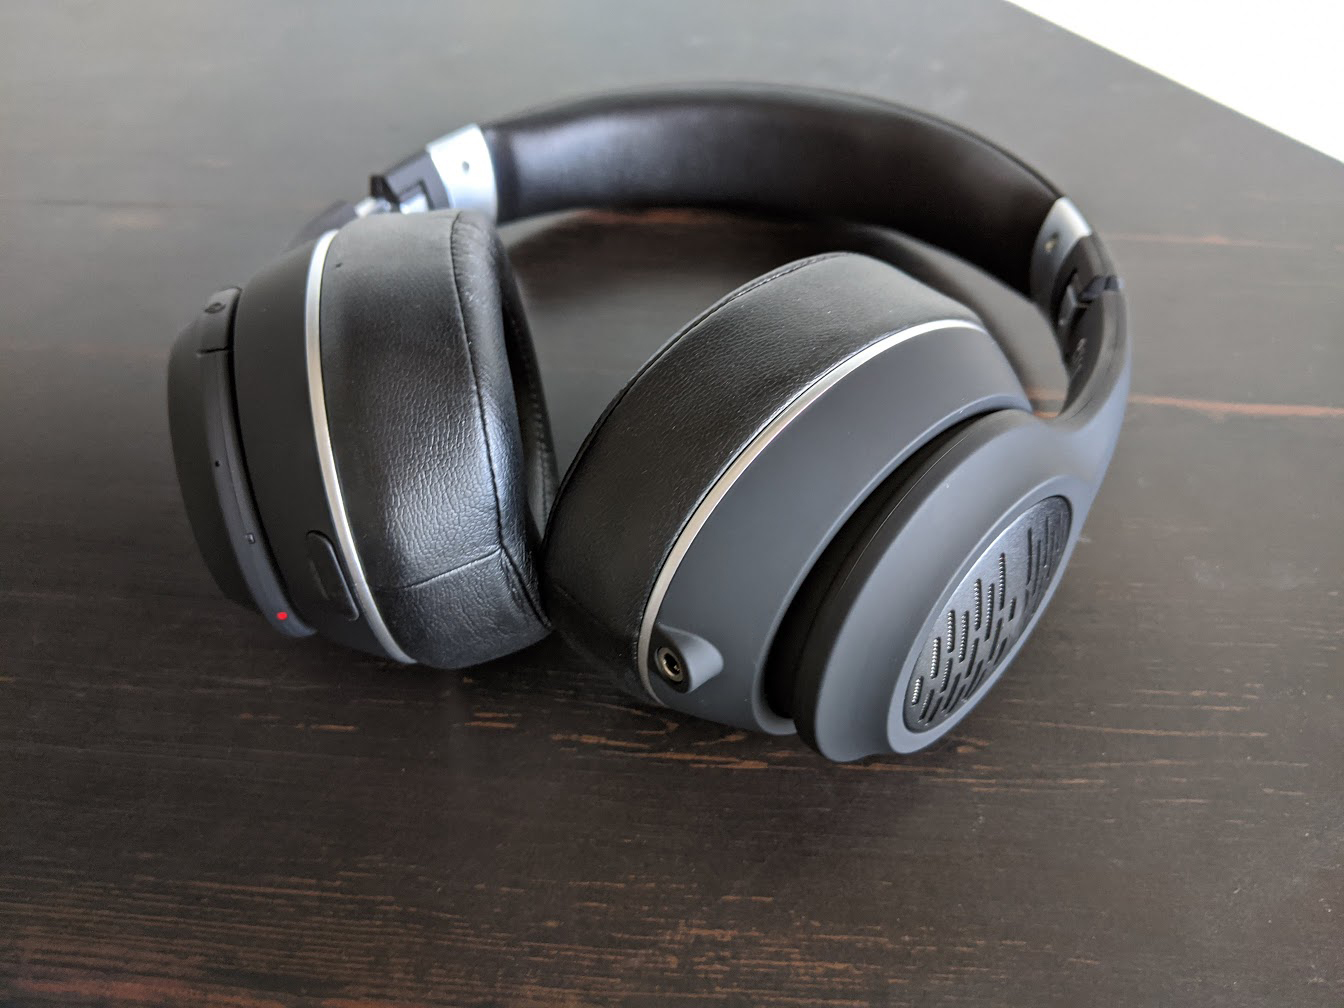 How to use Bluetooth headphones with a Nintendo Switch via the headphone jack: follow the instructions for your bluetooth headphones to get them to pairing status